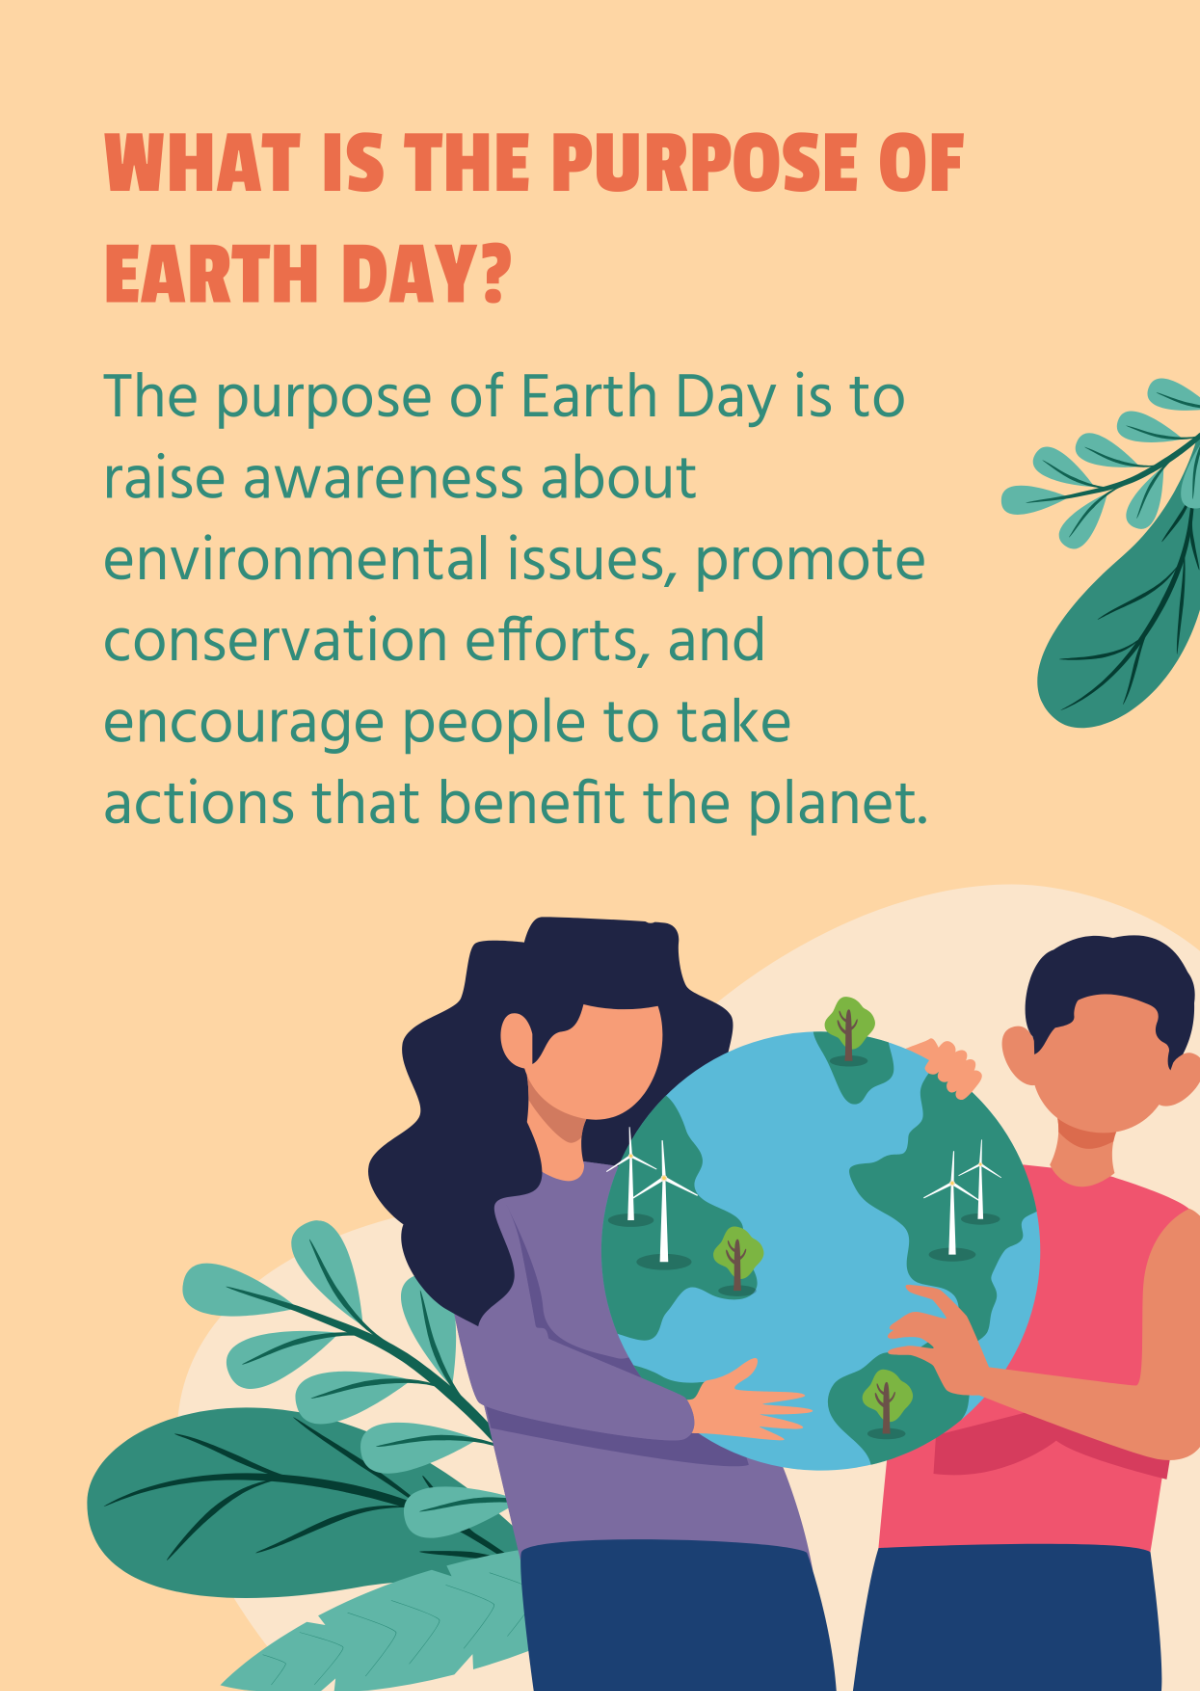 What is the purpose of Earth Day?